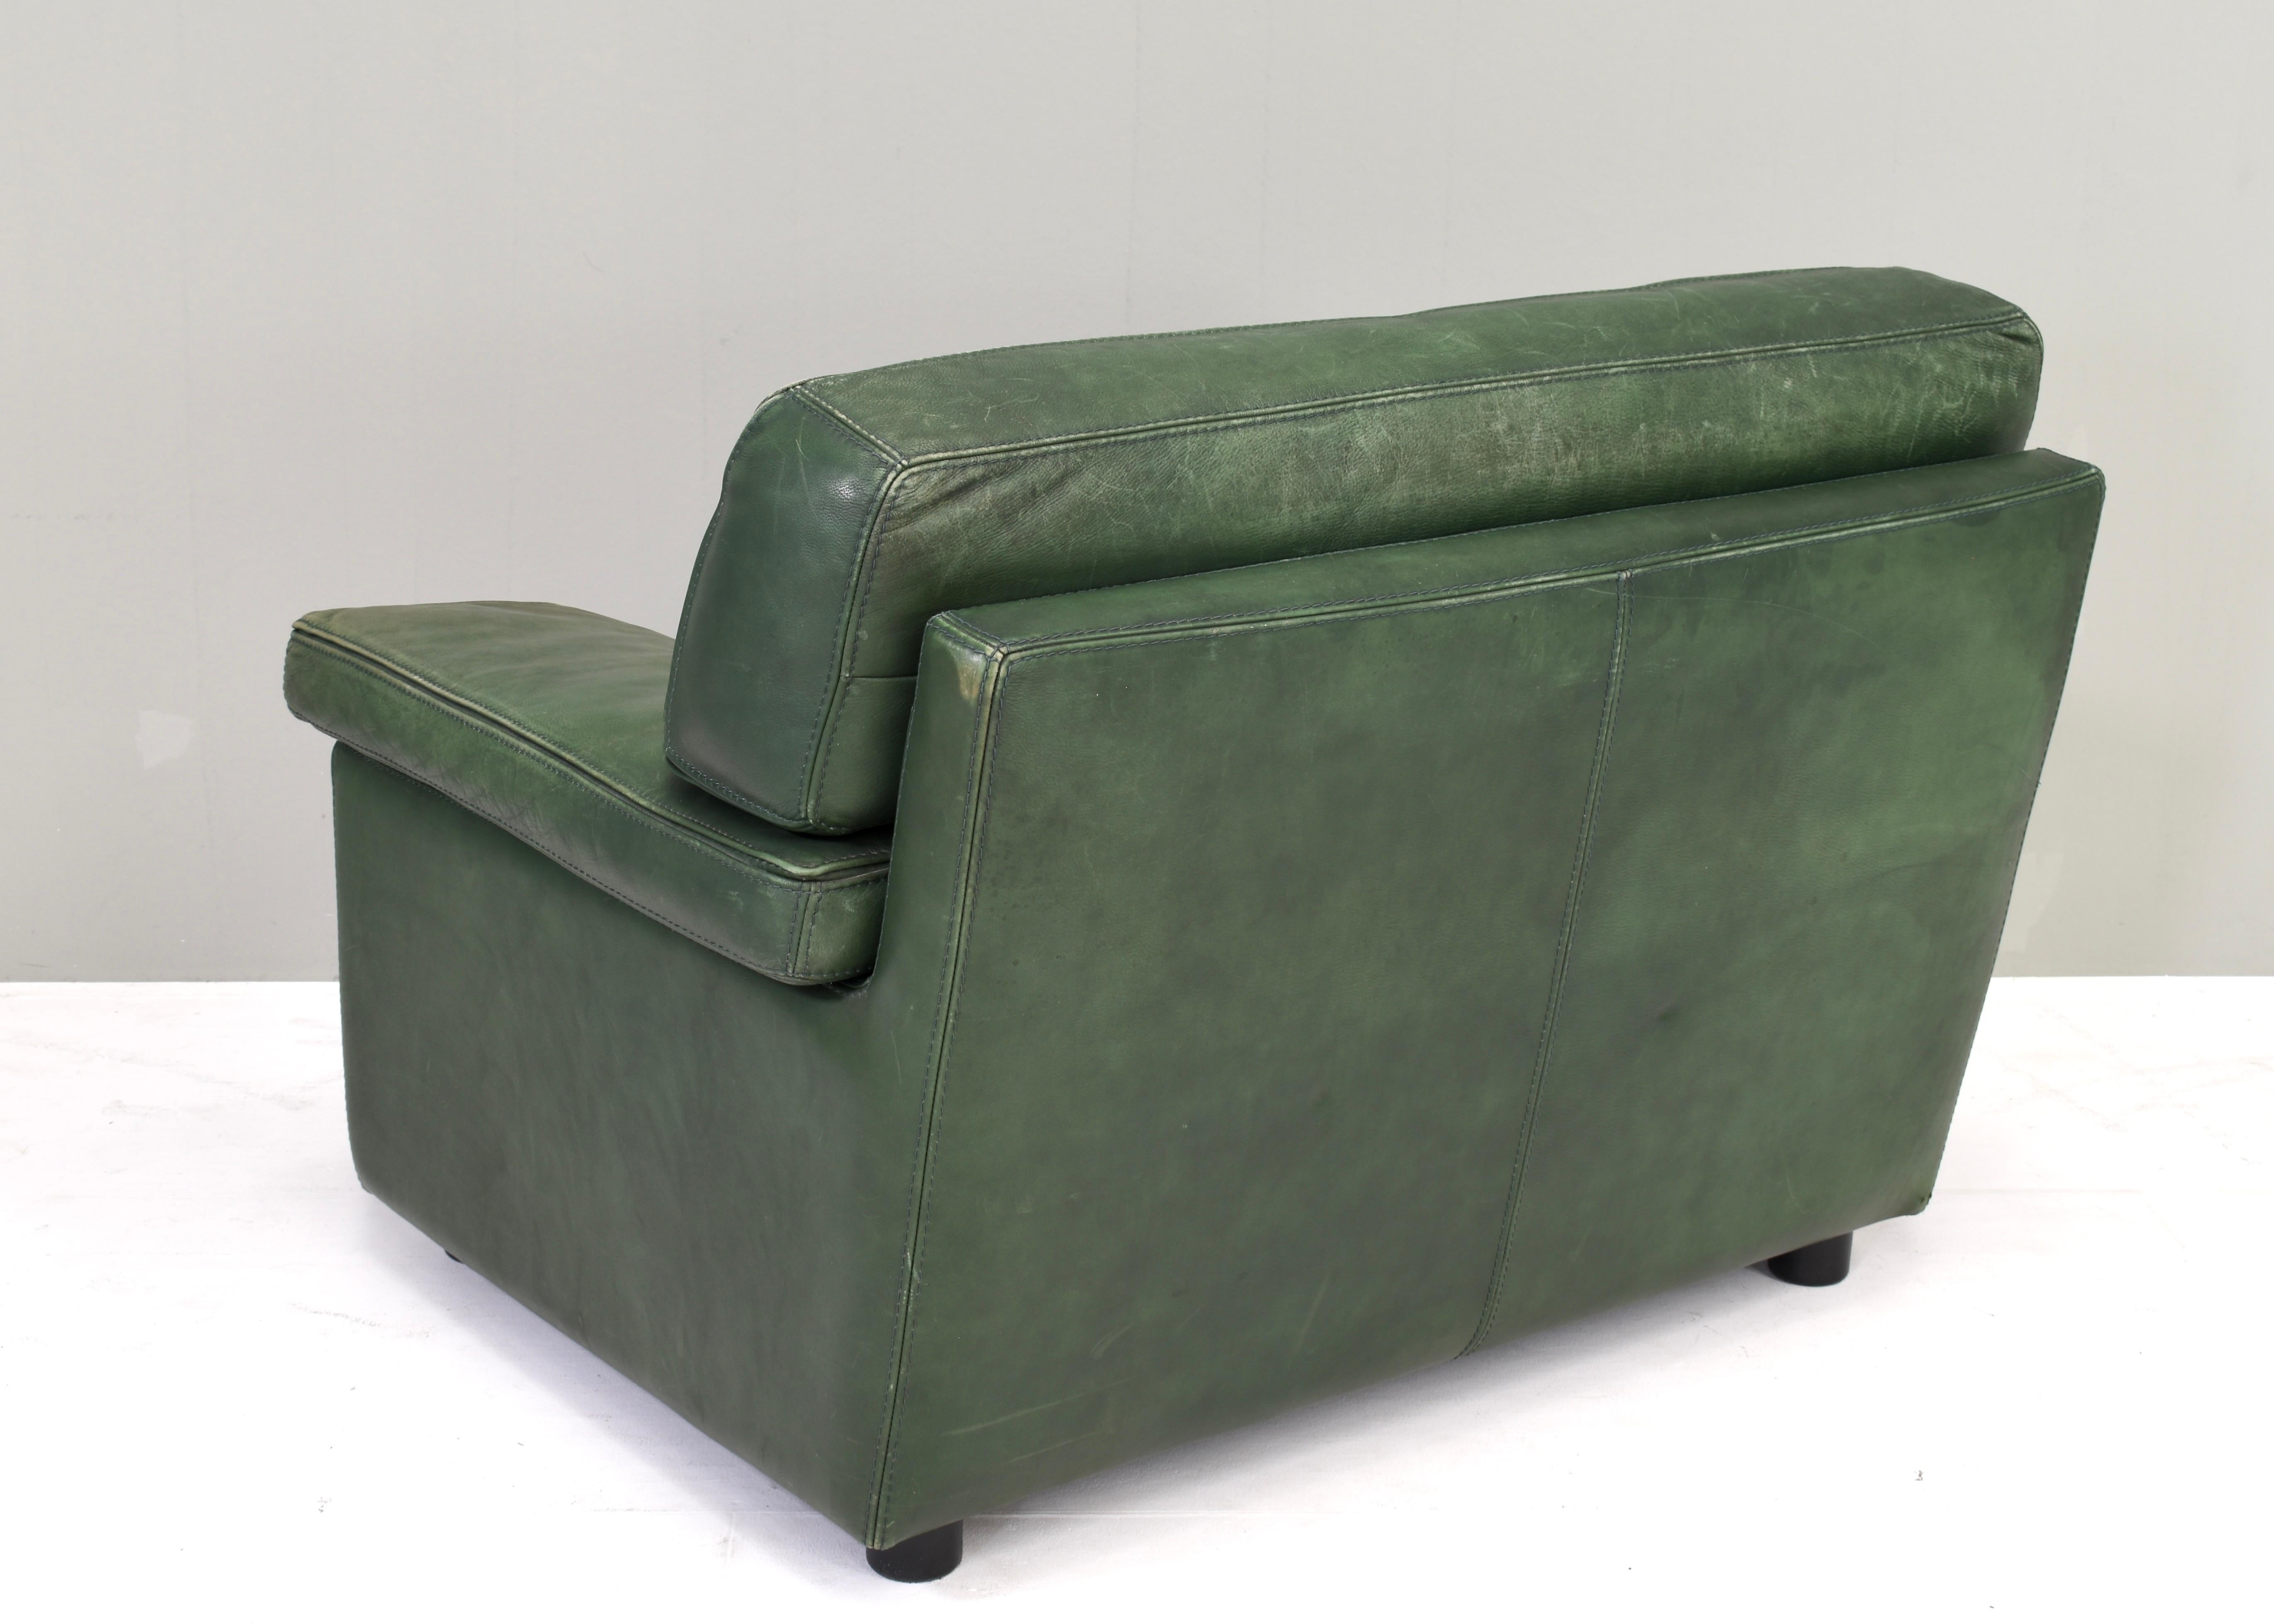 Roche Bobois Lounge Armchair in Original Green Patinated Leather – circa 1970 For Sale 8